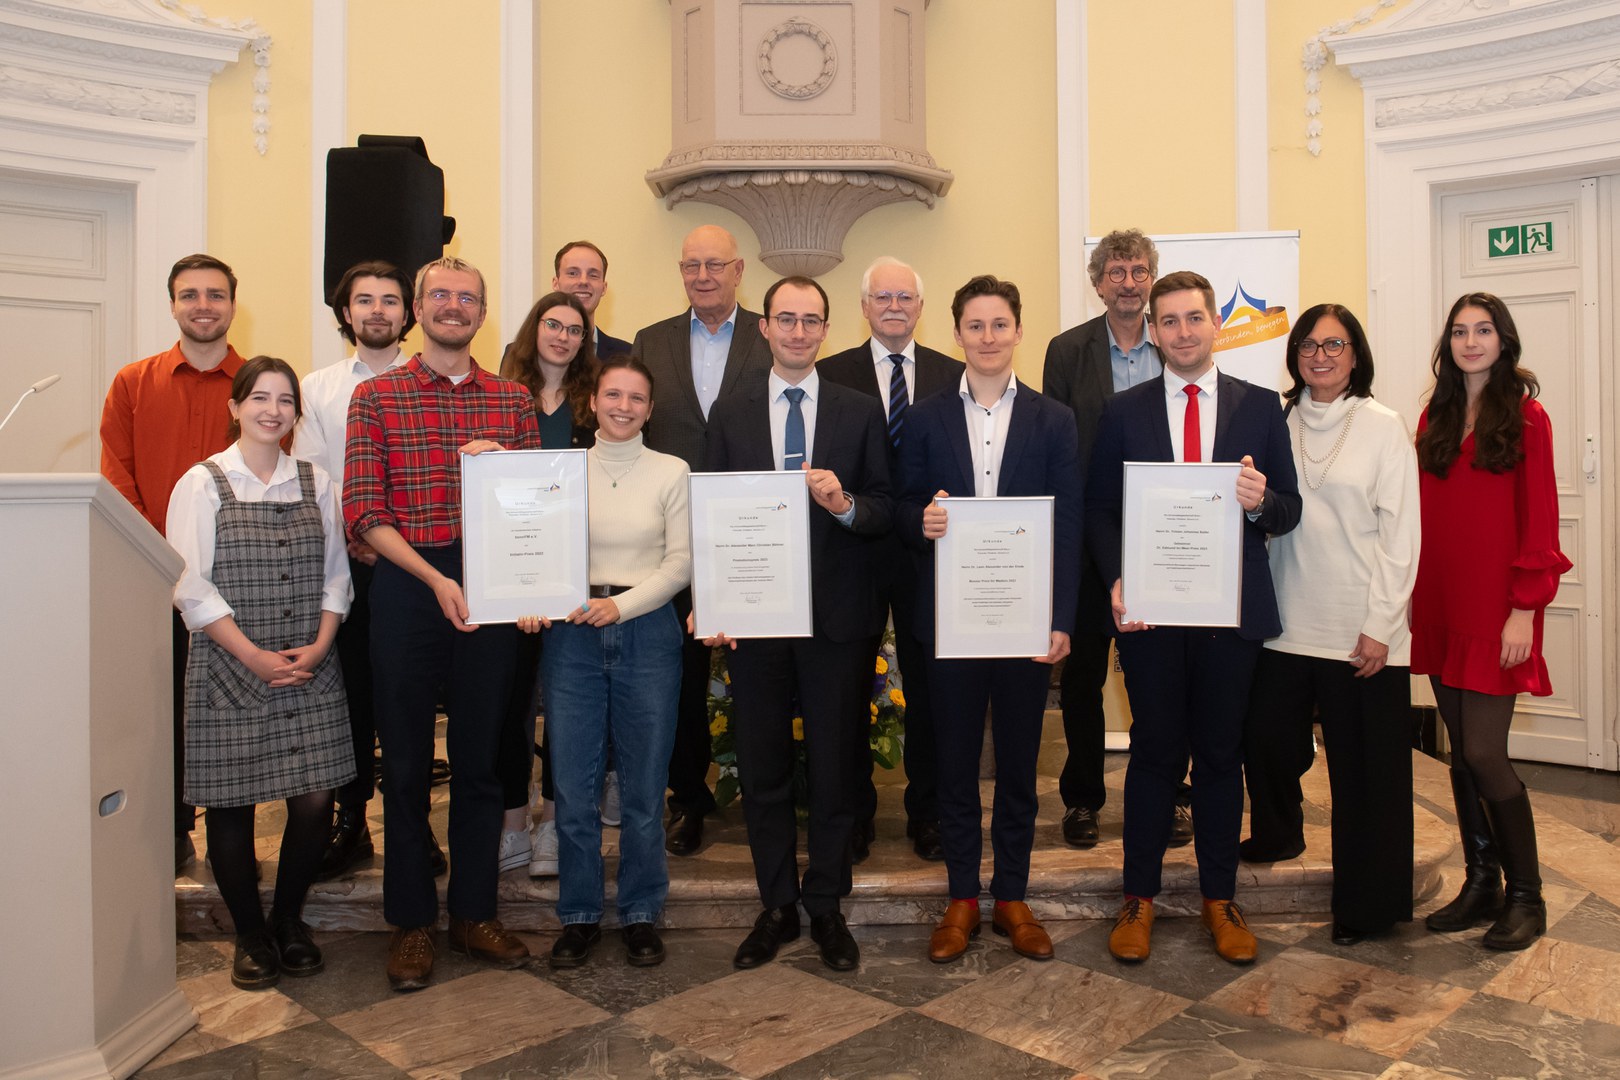 The Universitätsgesellschaft Bonn has recognized exceptional doctoral theses and student engagement - - here, the award-winners are joined by members of the UGB Board and supervisors of the award-winning works.